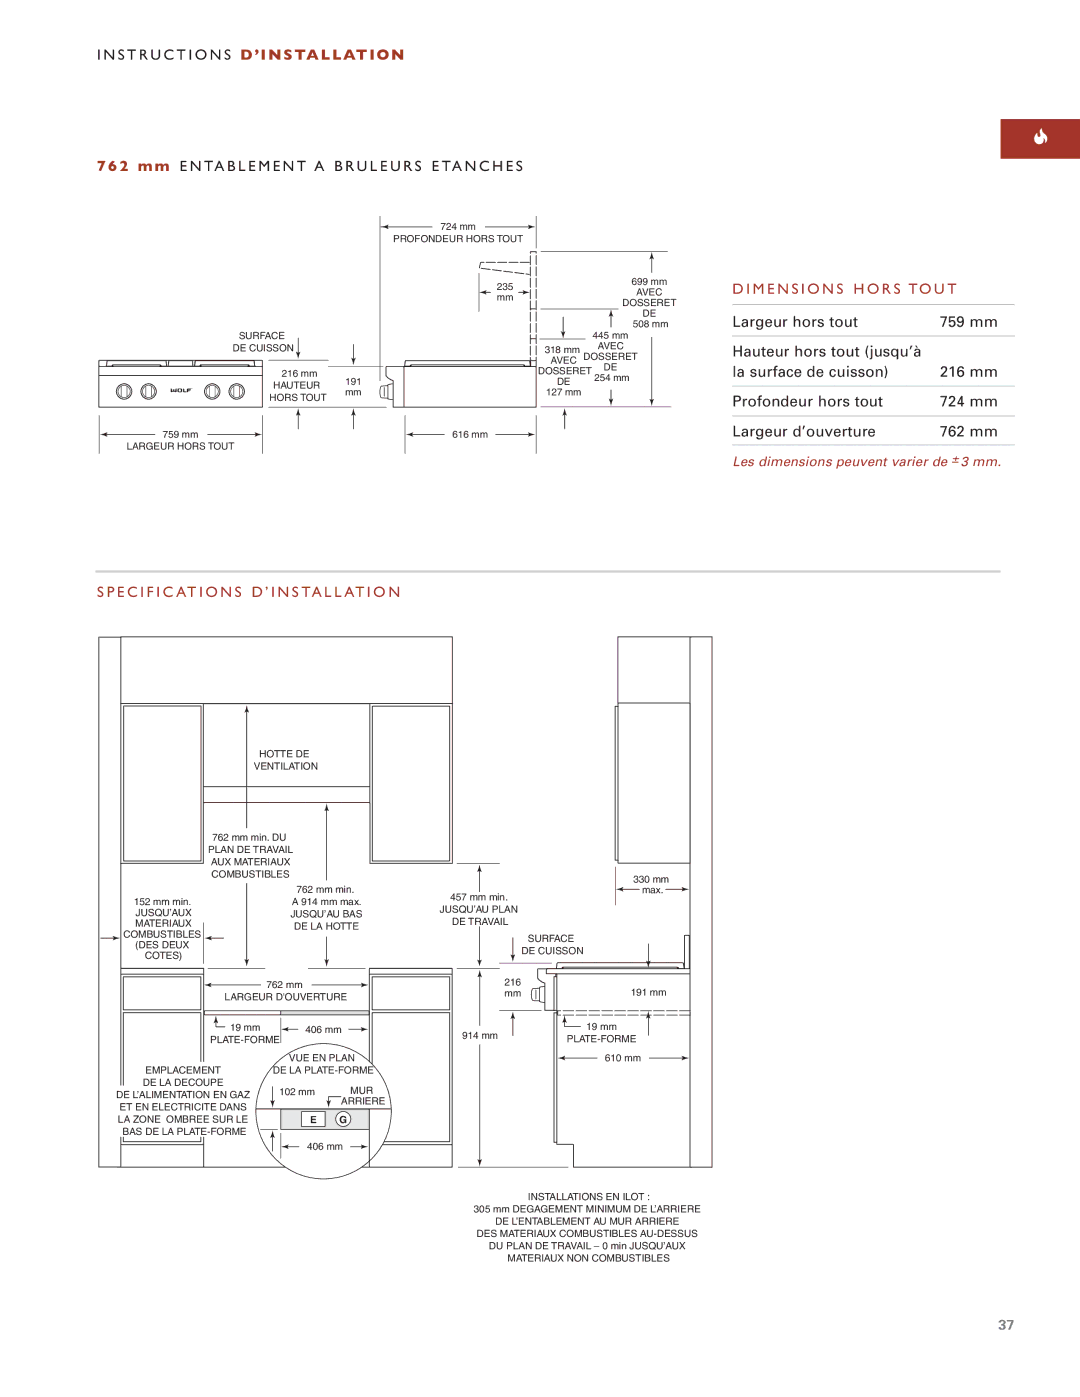 Wolf ICBSRT304 installation instructions Dimensions Hors Tout, Specifications D’INSTALLATION 